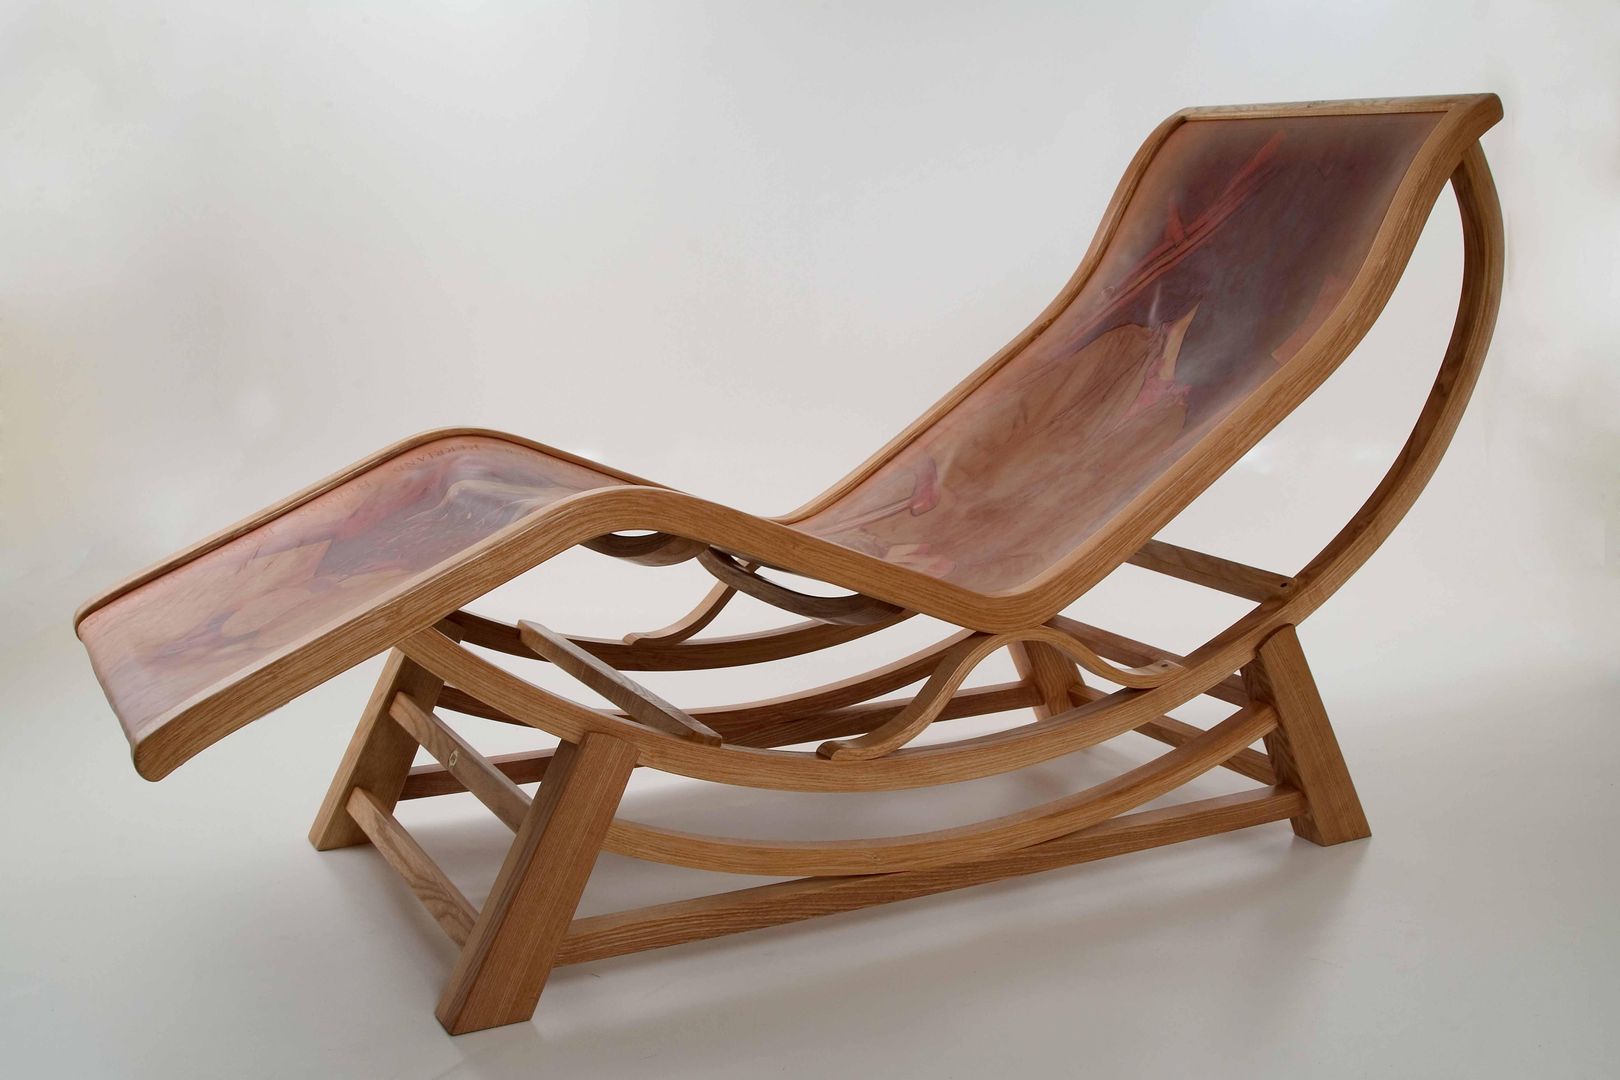 Corbusier-inspired chaise longue by Bruce Burman homify Dormitorios clásicos Divanes y chaise longue